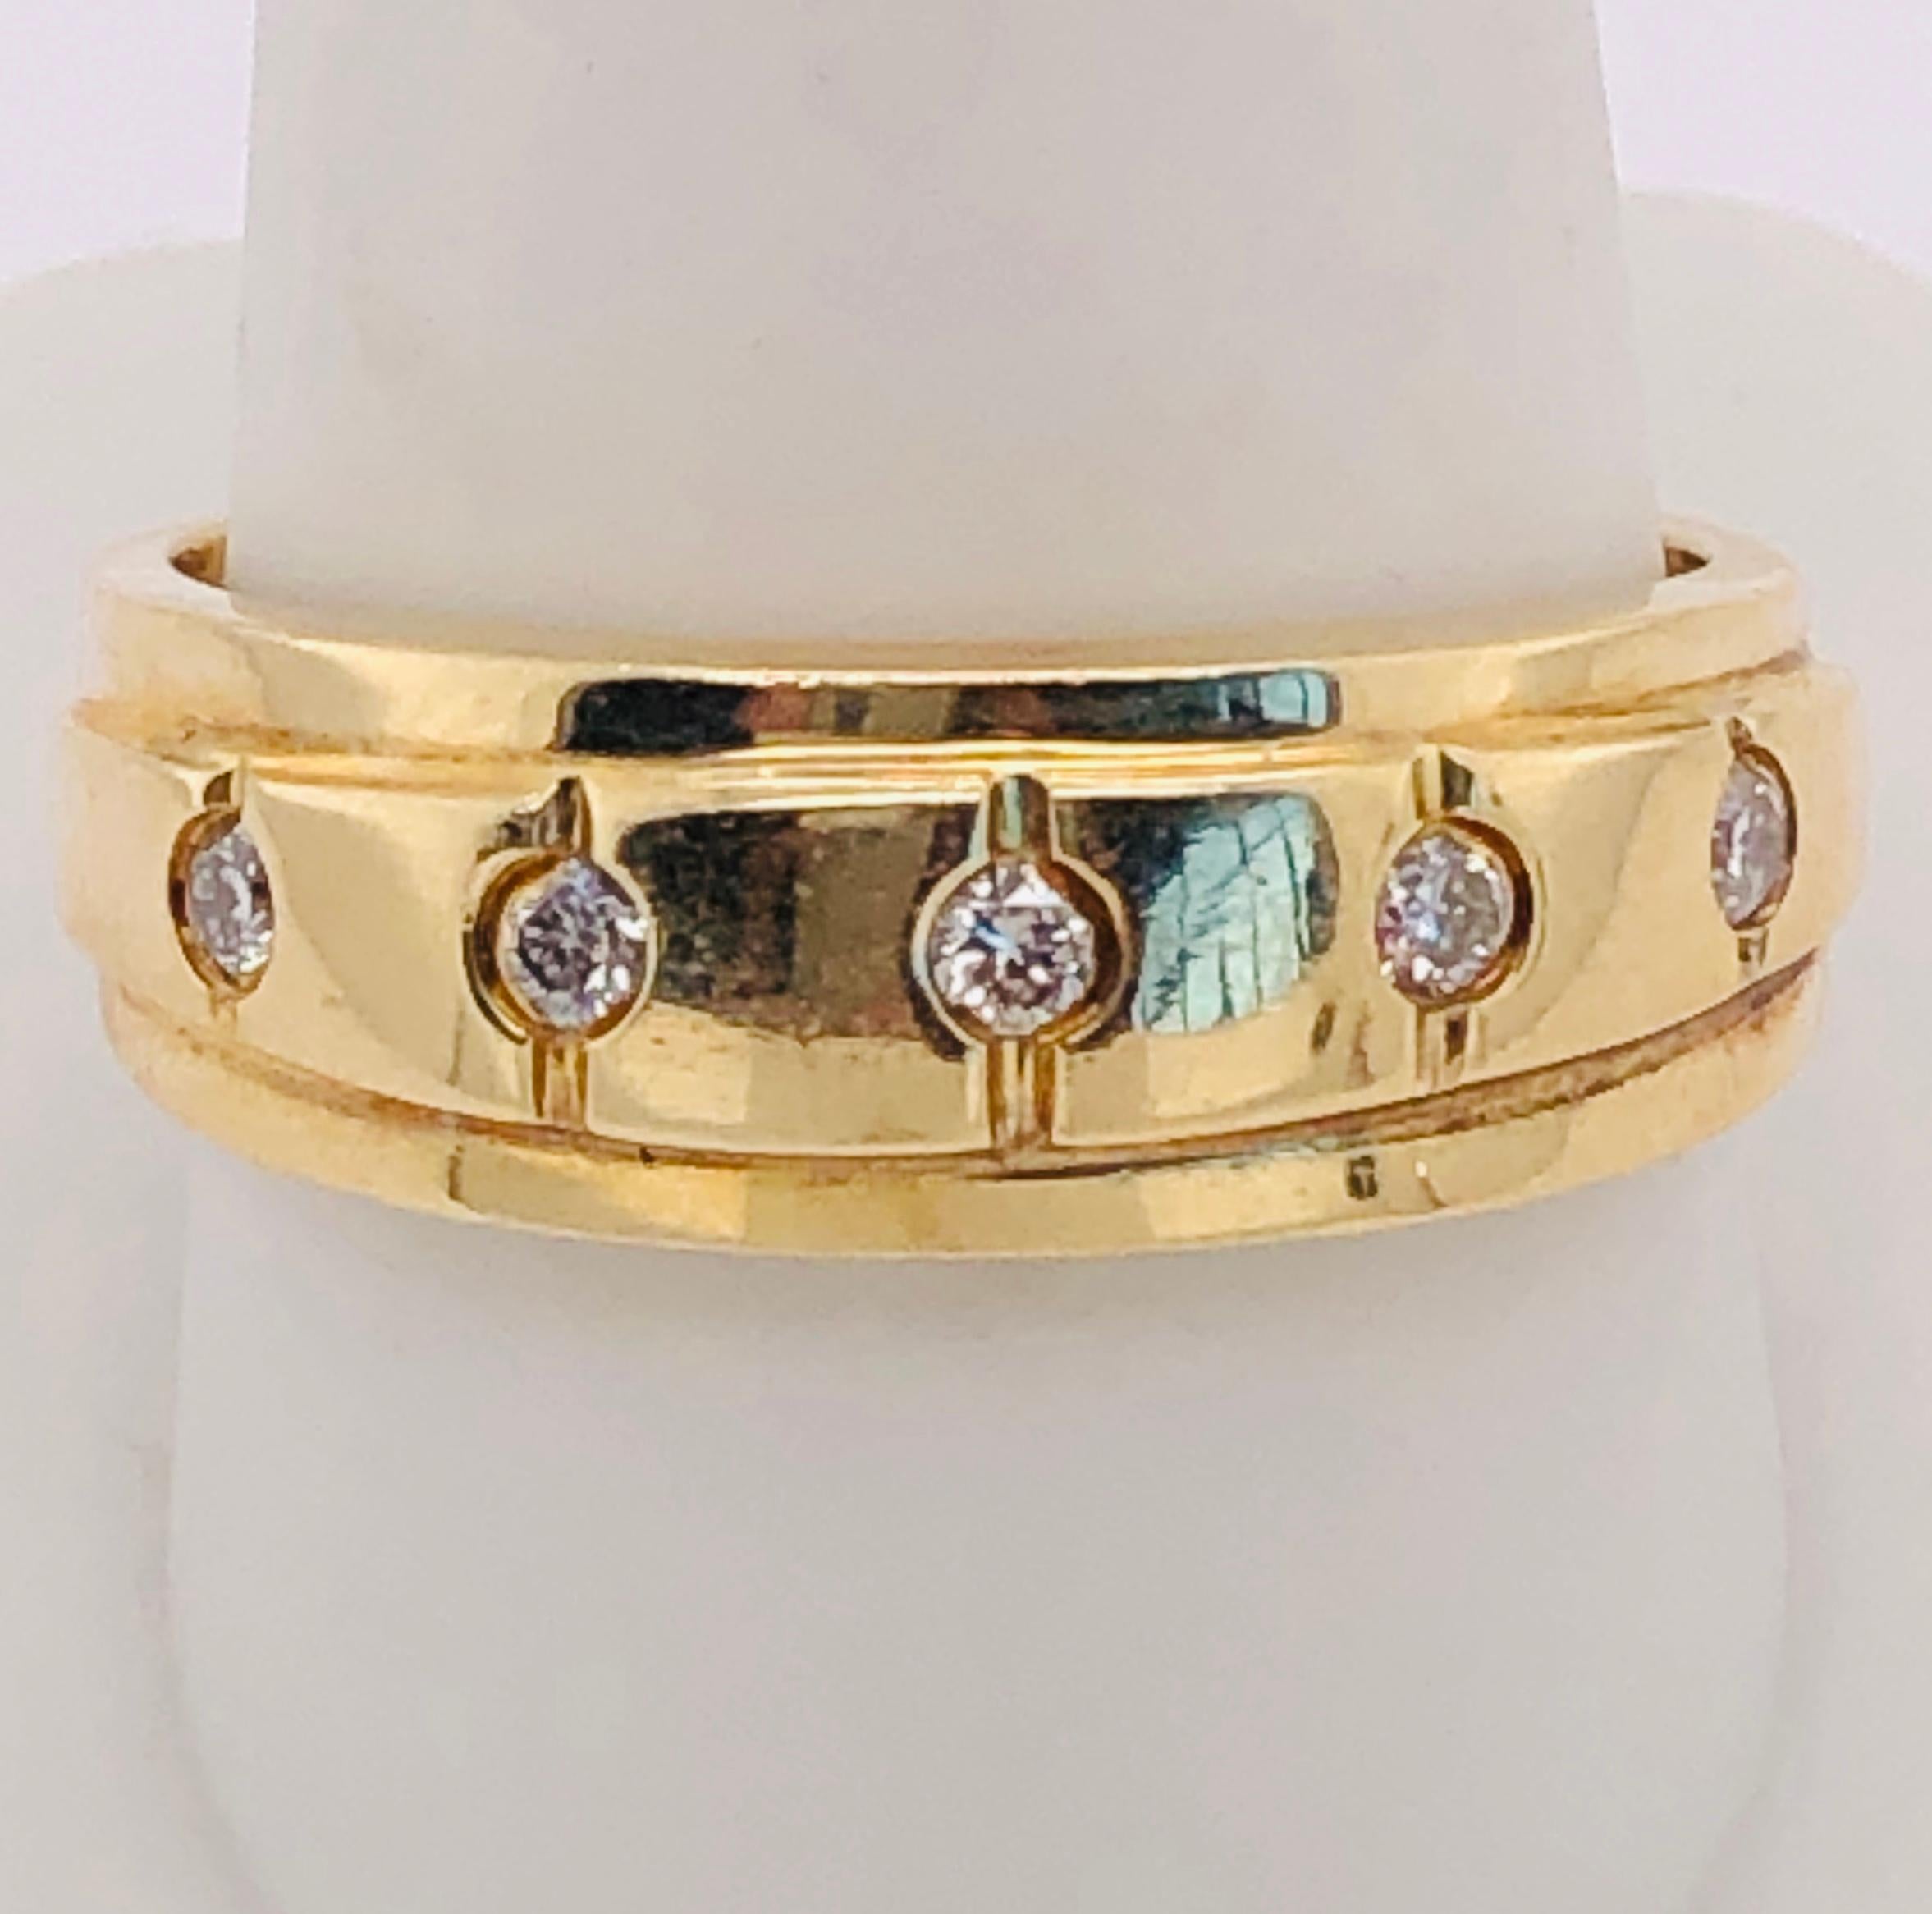 14Kt Yellow Gold Ring With Five Diamonds 
10.5 Size. 0.35 Total Diamond Weight. Total weight 6.38 grams